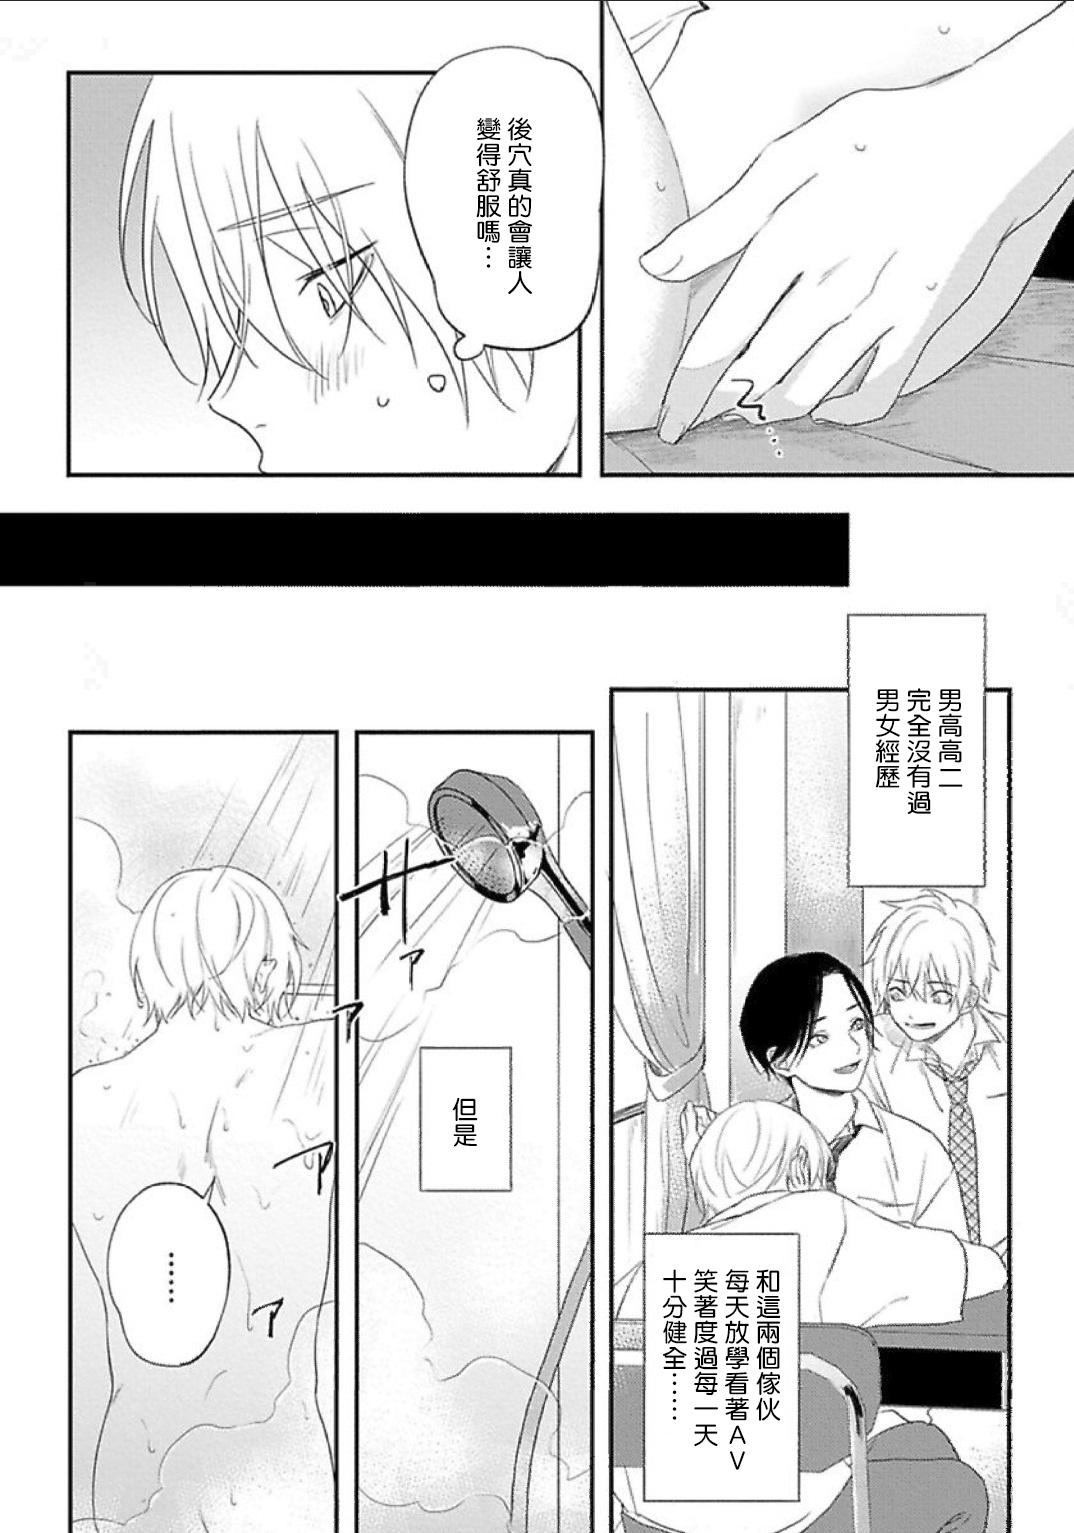 Dirty Talk Houkago Virginity - Virginity afterschool 1 Abuse - Page 6